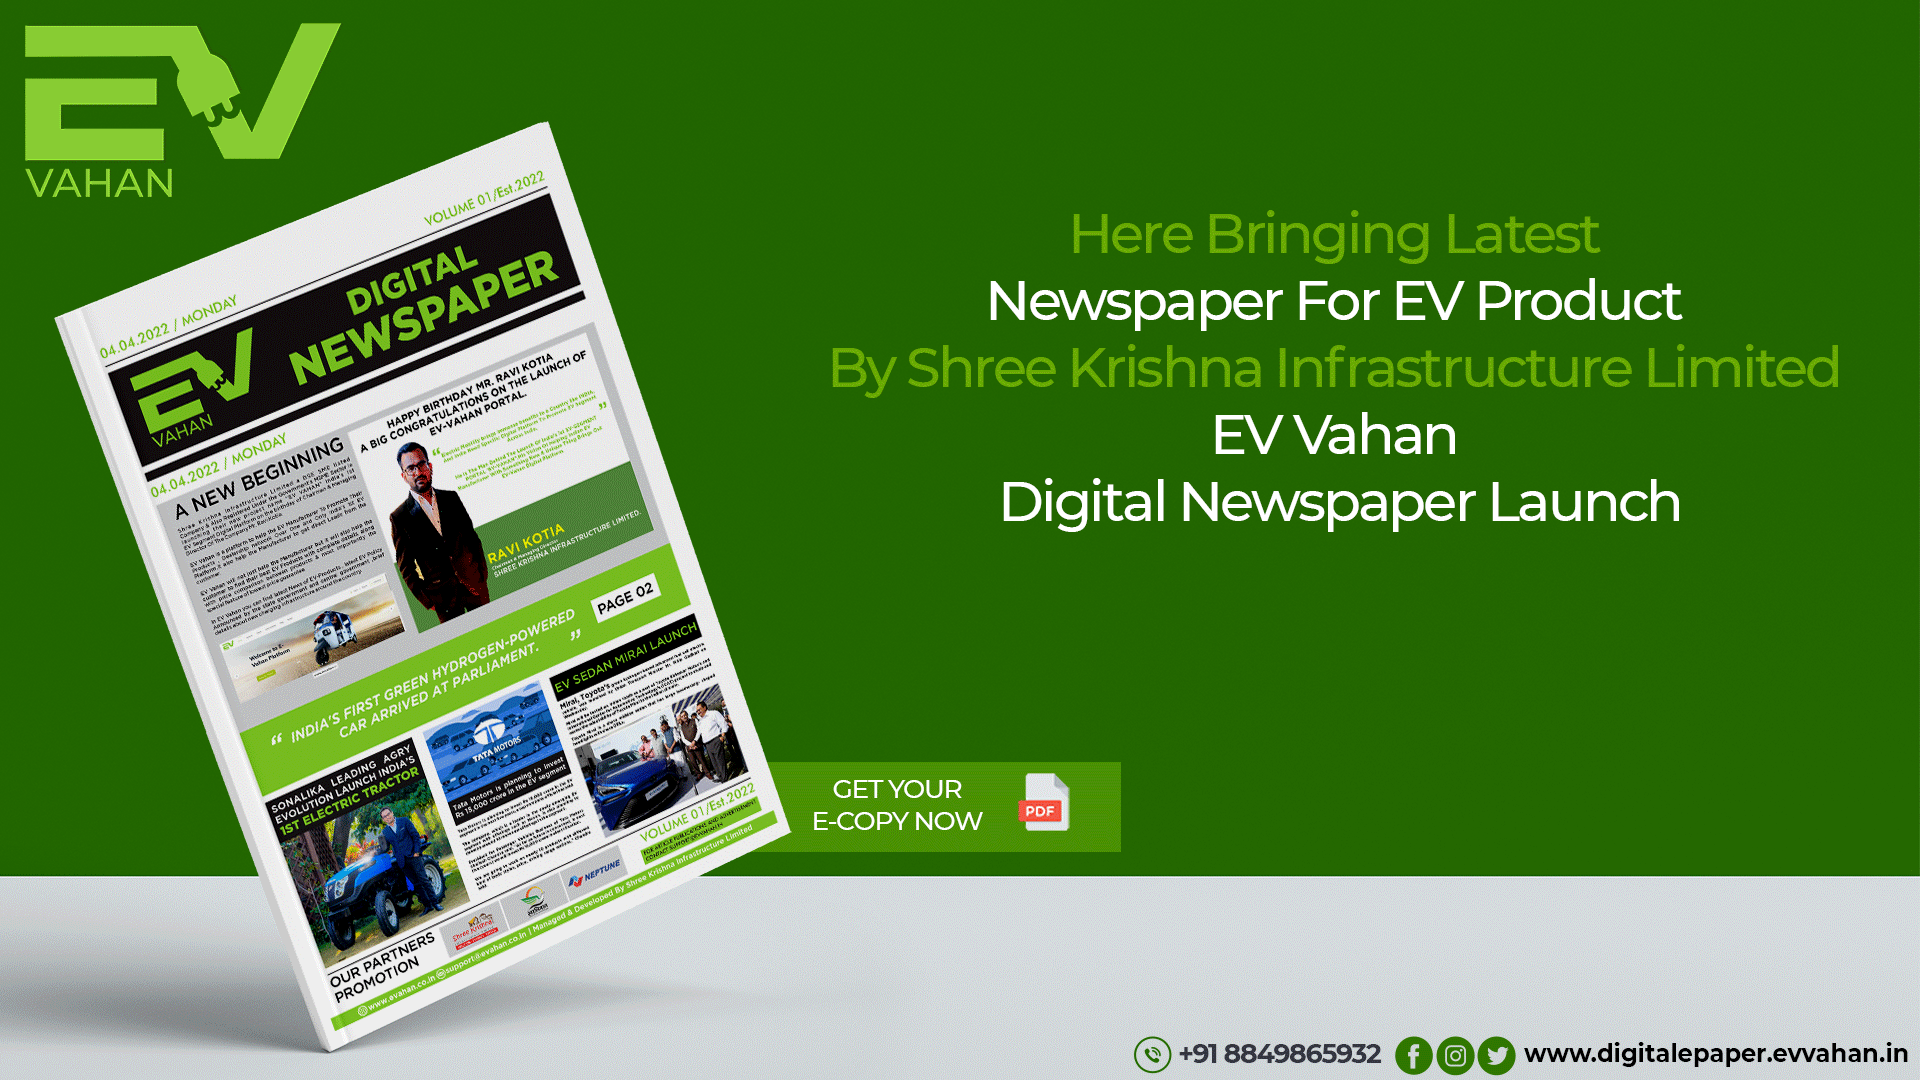 Here Bringing Latest Newspaper Product Launch By Shree Krishna Infrastructure Limited.